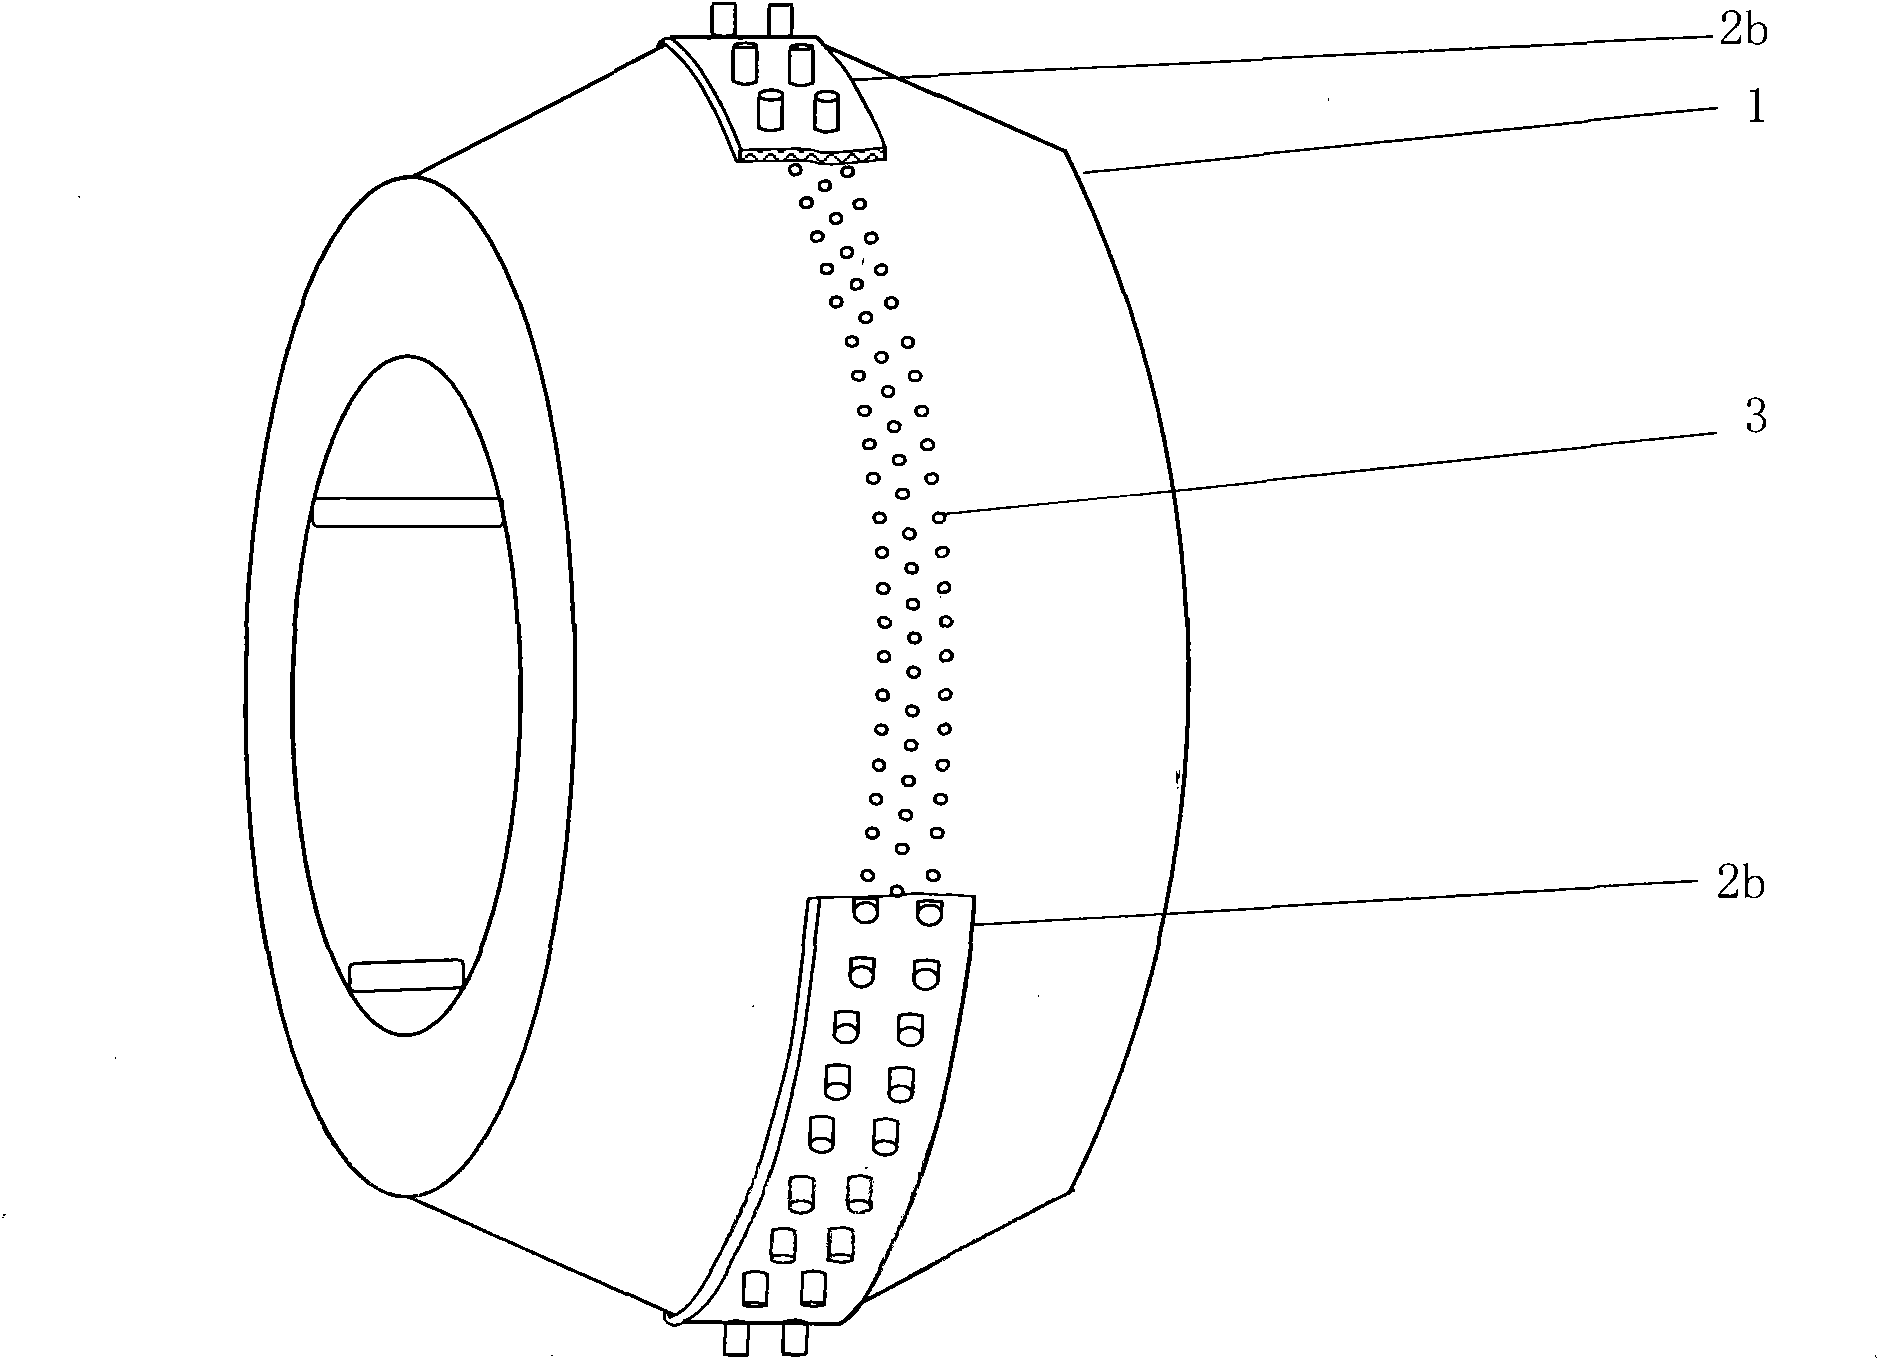 Single drum washing machine with dehydration holes capable of automatically opening and closing